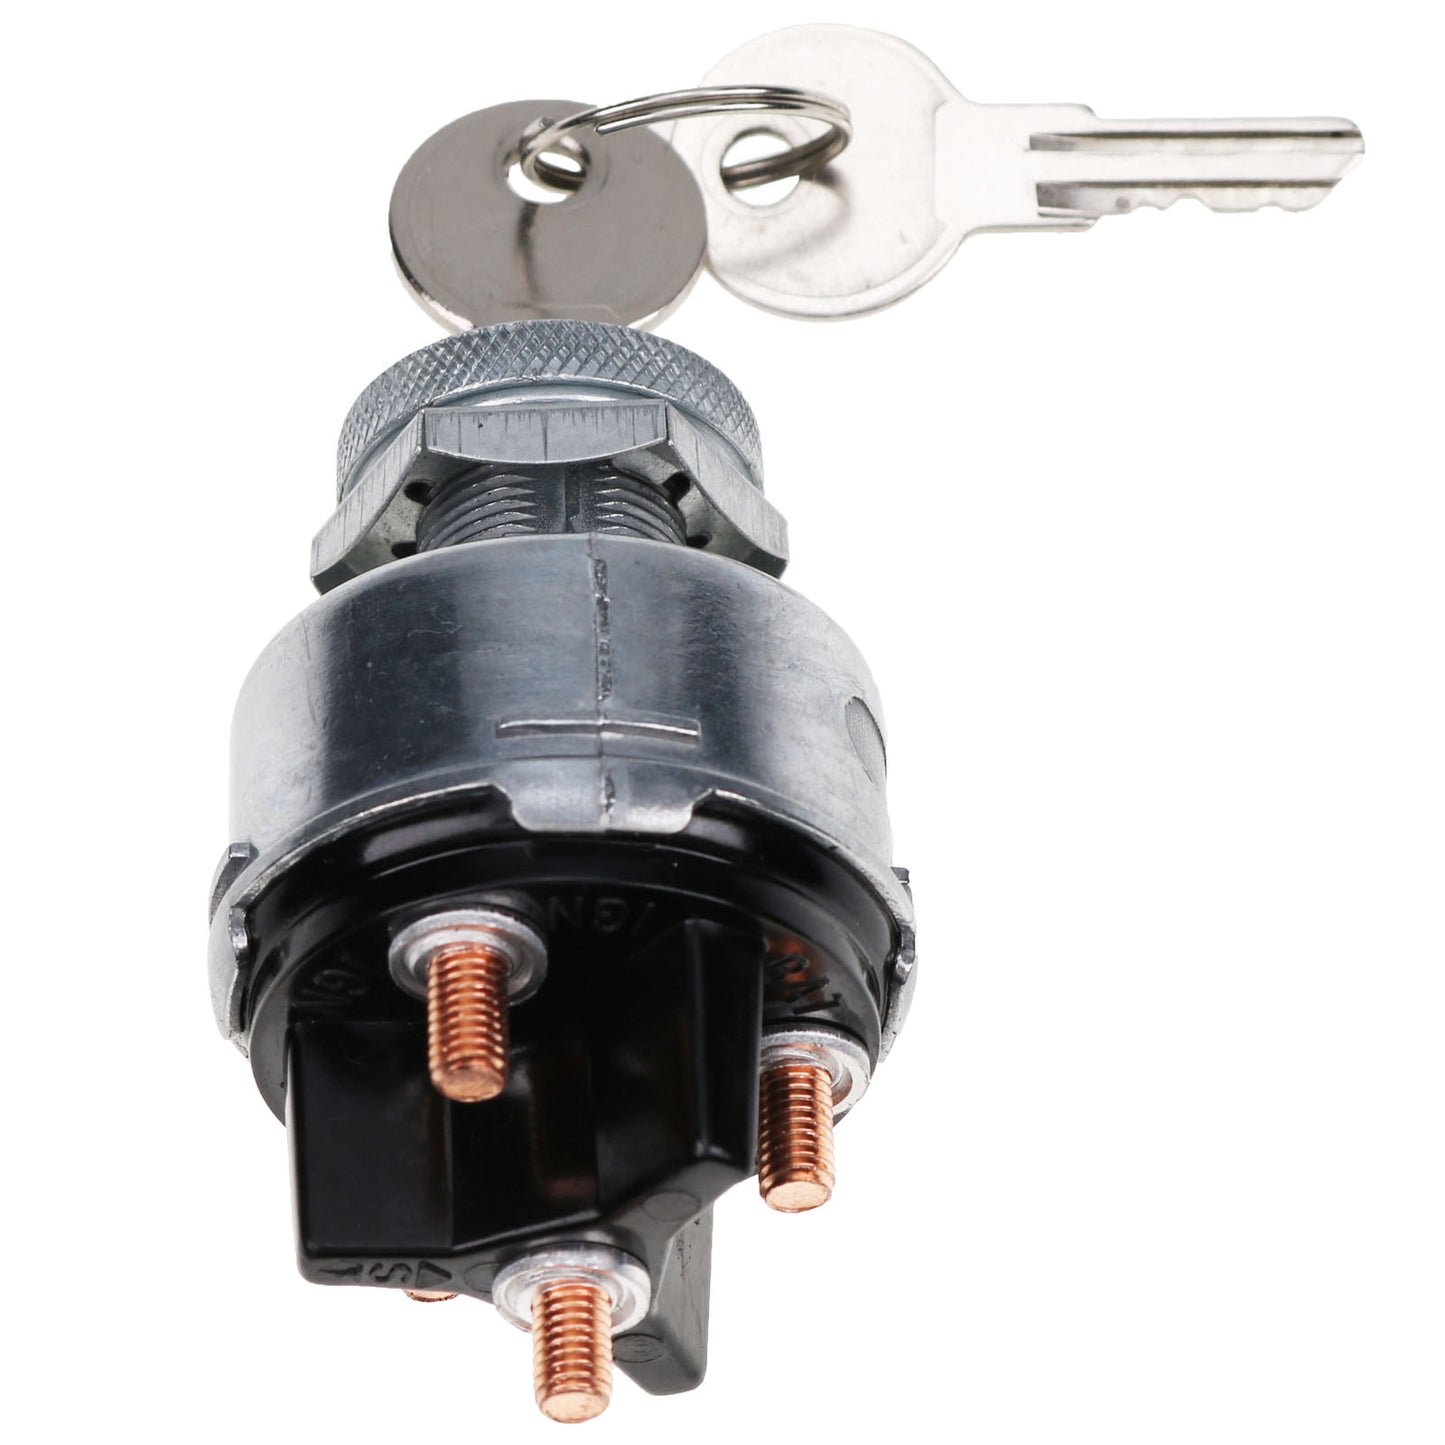 New 6665606 MG641833 Ignition Key Switch Compatible with Bobcat 763 773 843 853 863 864 873 943 953 643 645 653 730 731 732 741 742 743 751